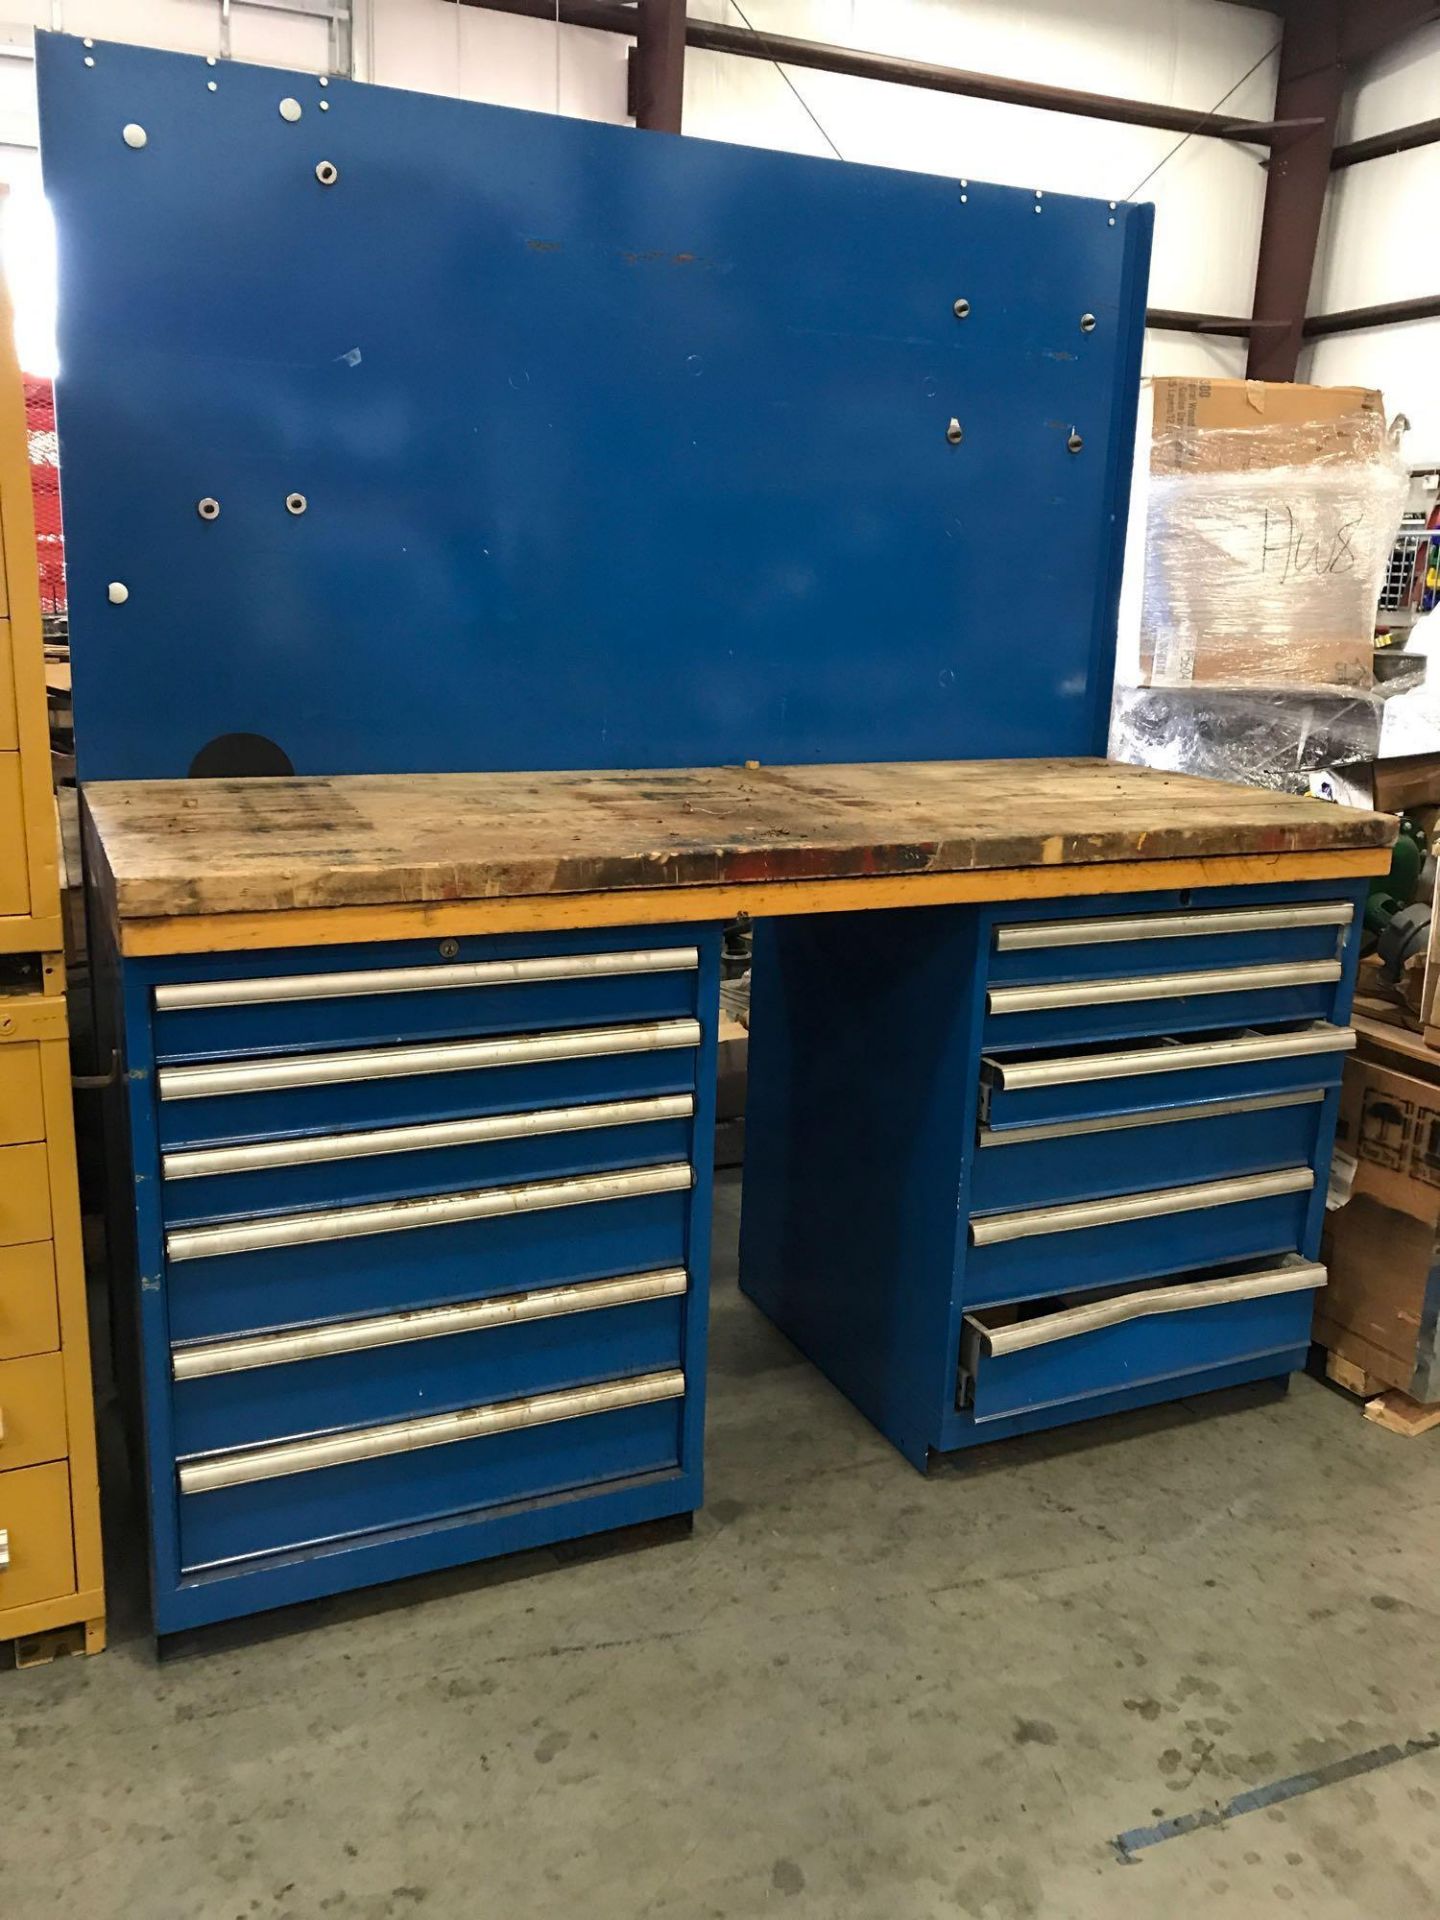 11 DRAWER INDUSTRIAL WORK BENCH - Image 2 of 2